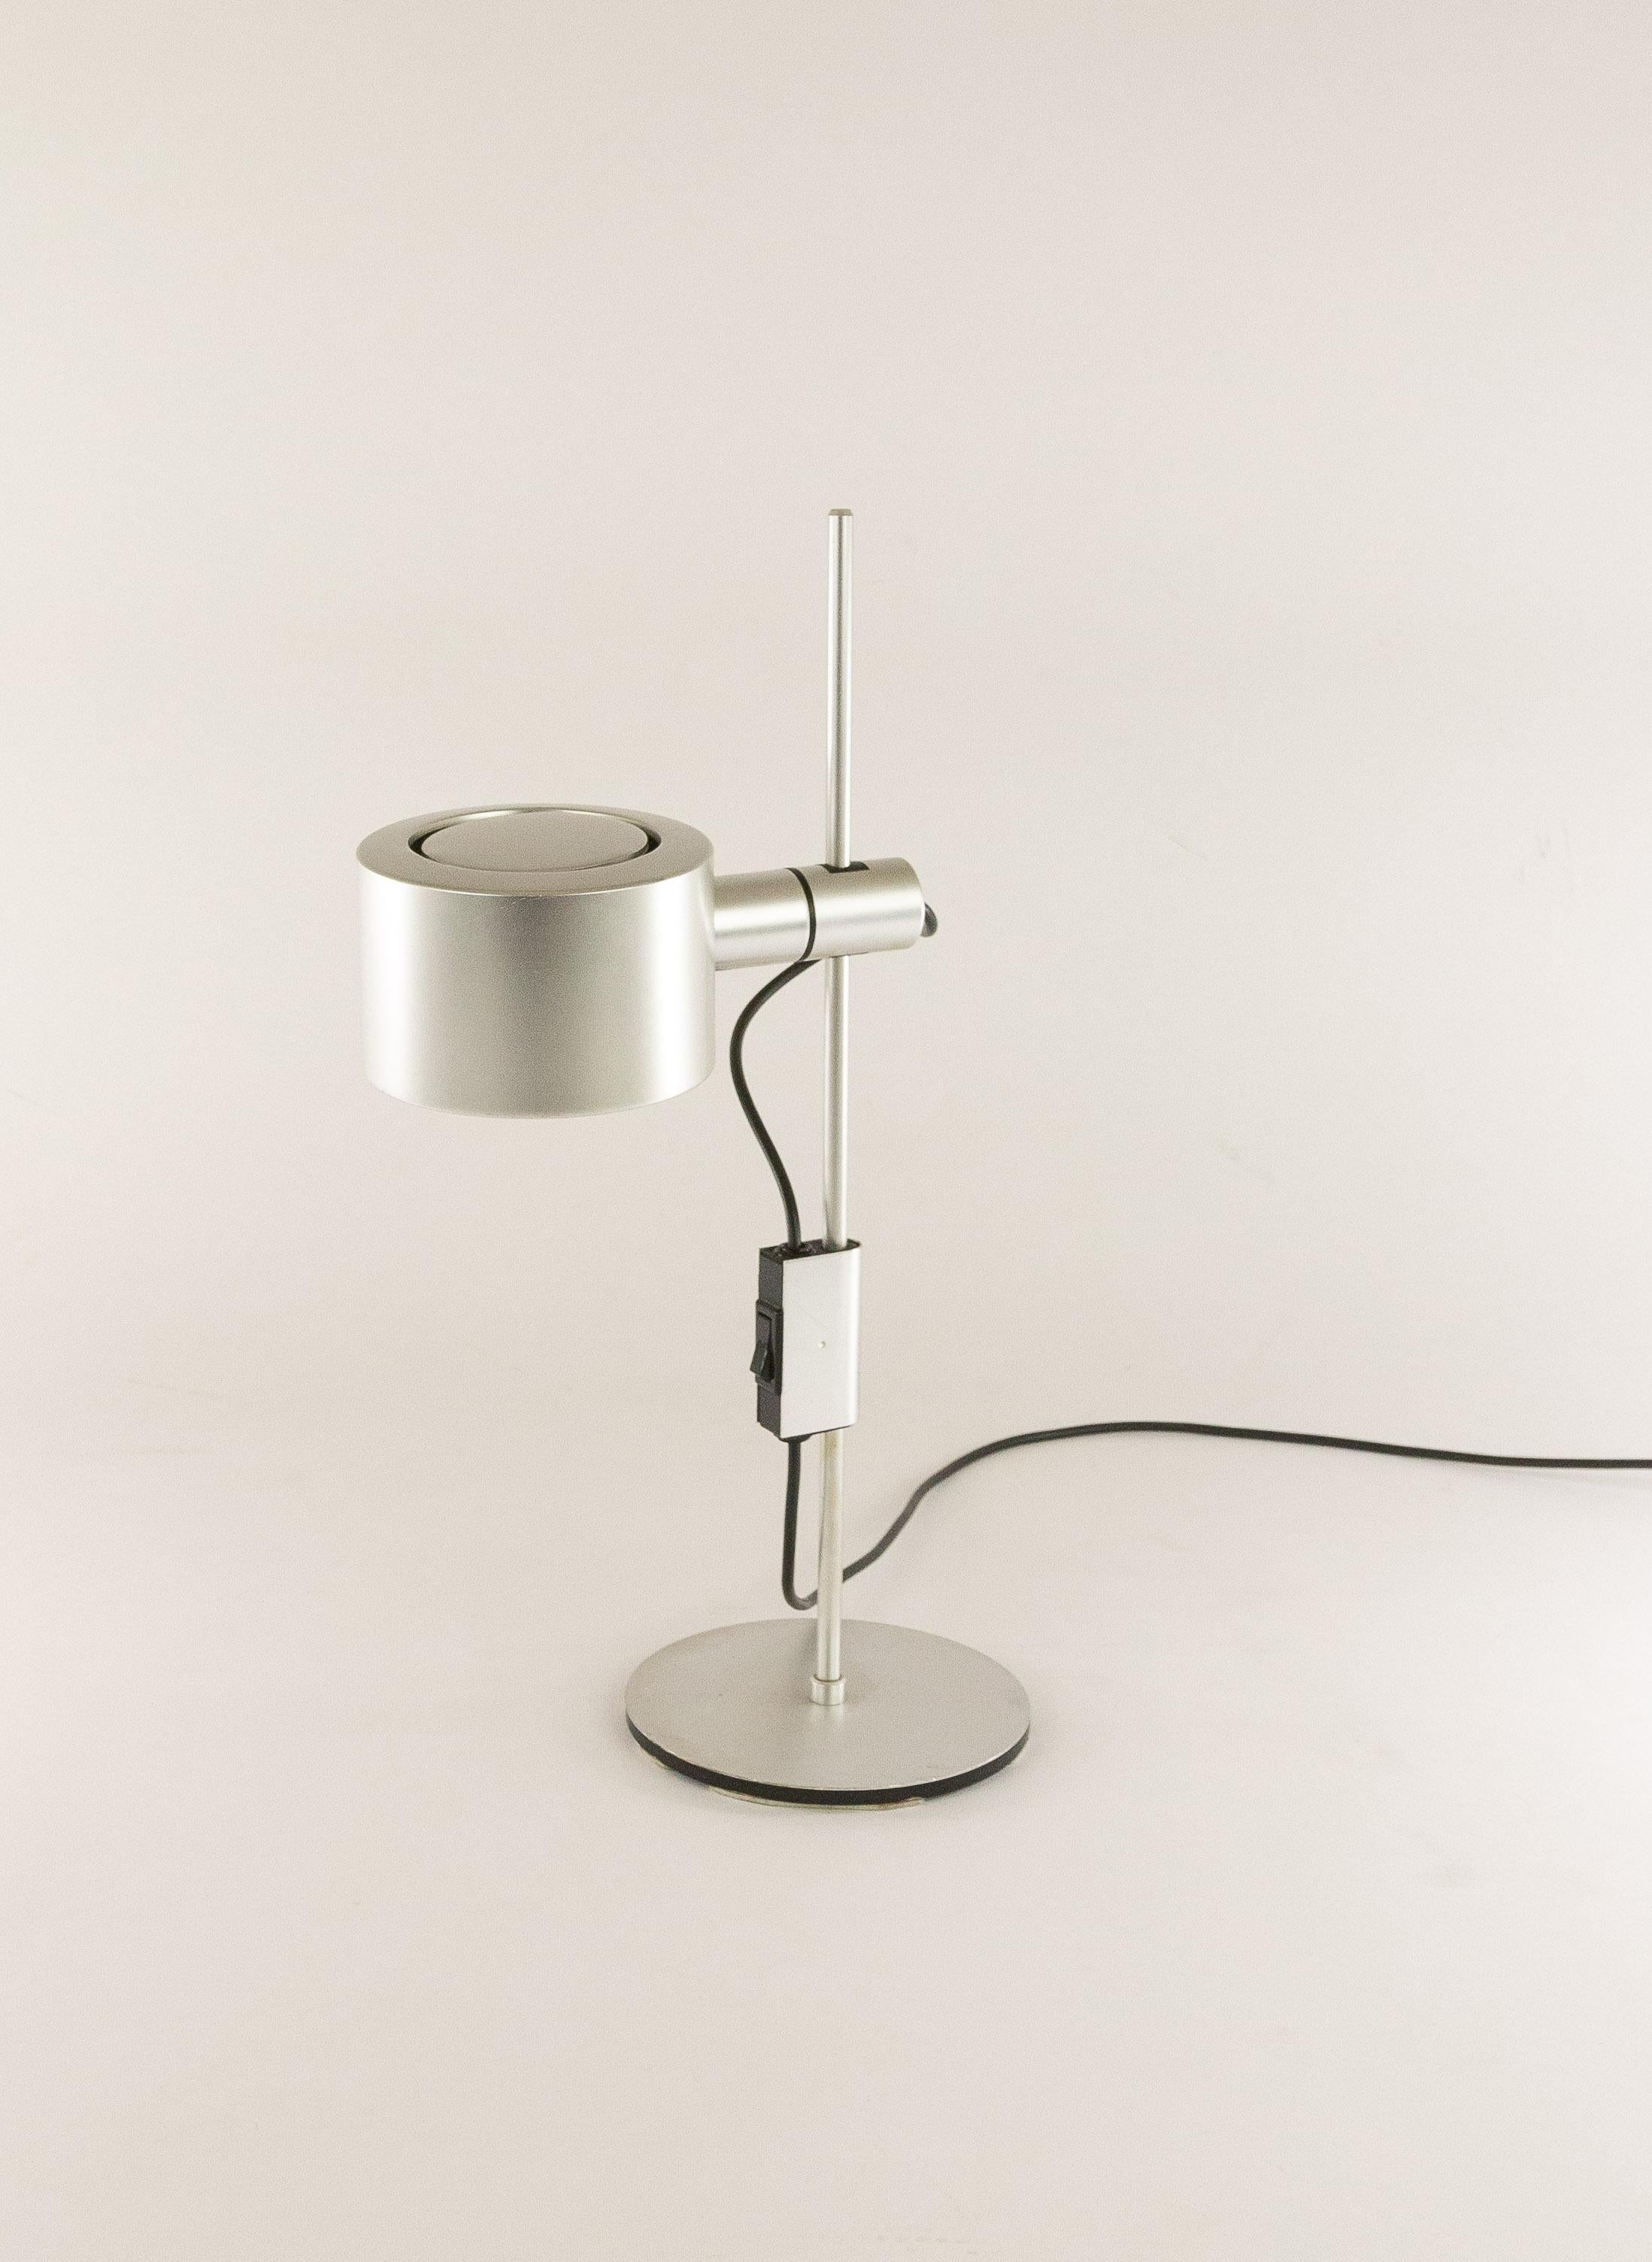 Mid-20th Century Aluminum Table Lamp by Ronald Homes for Conelight Limited, 1960s